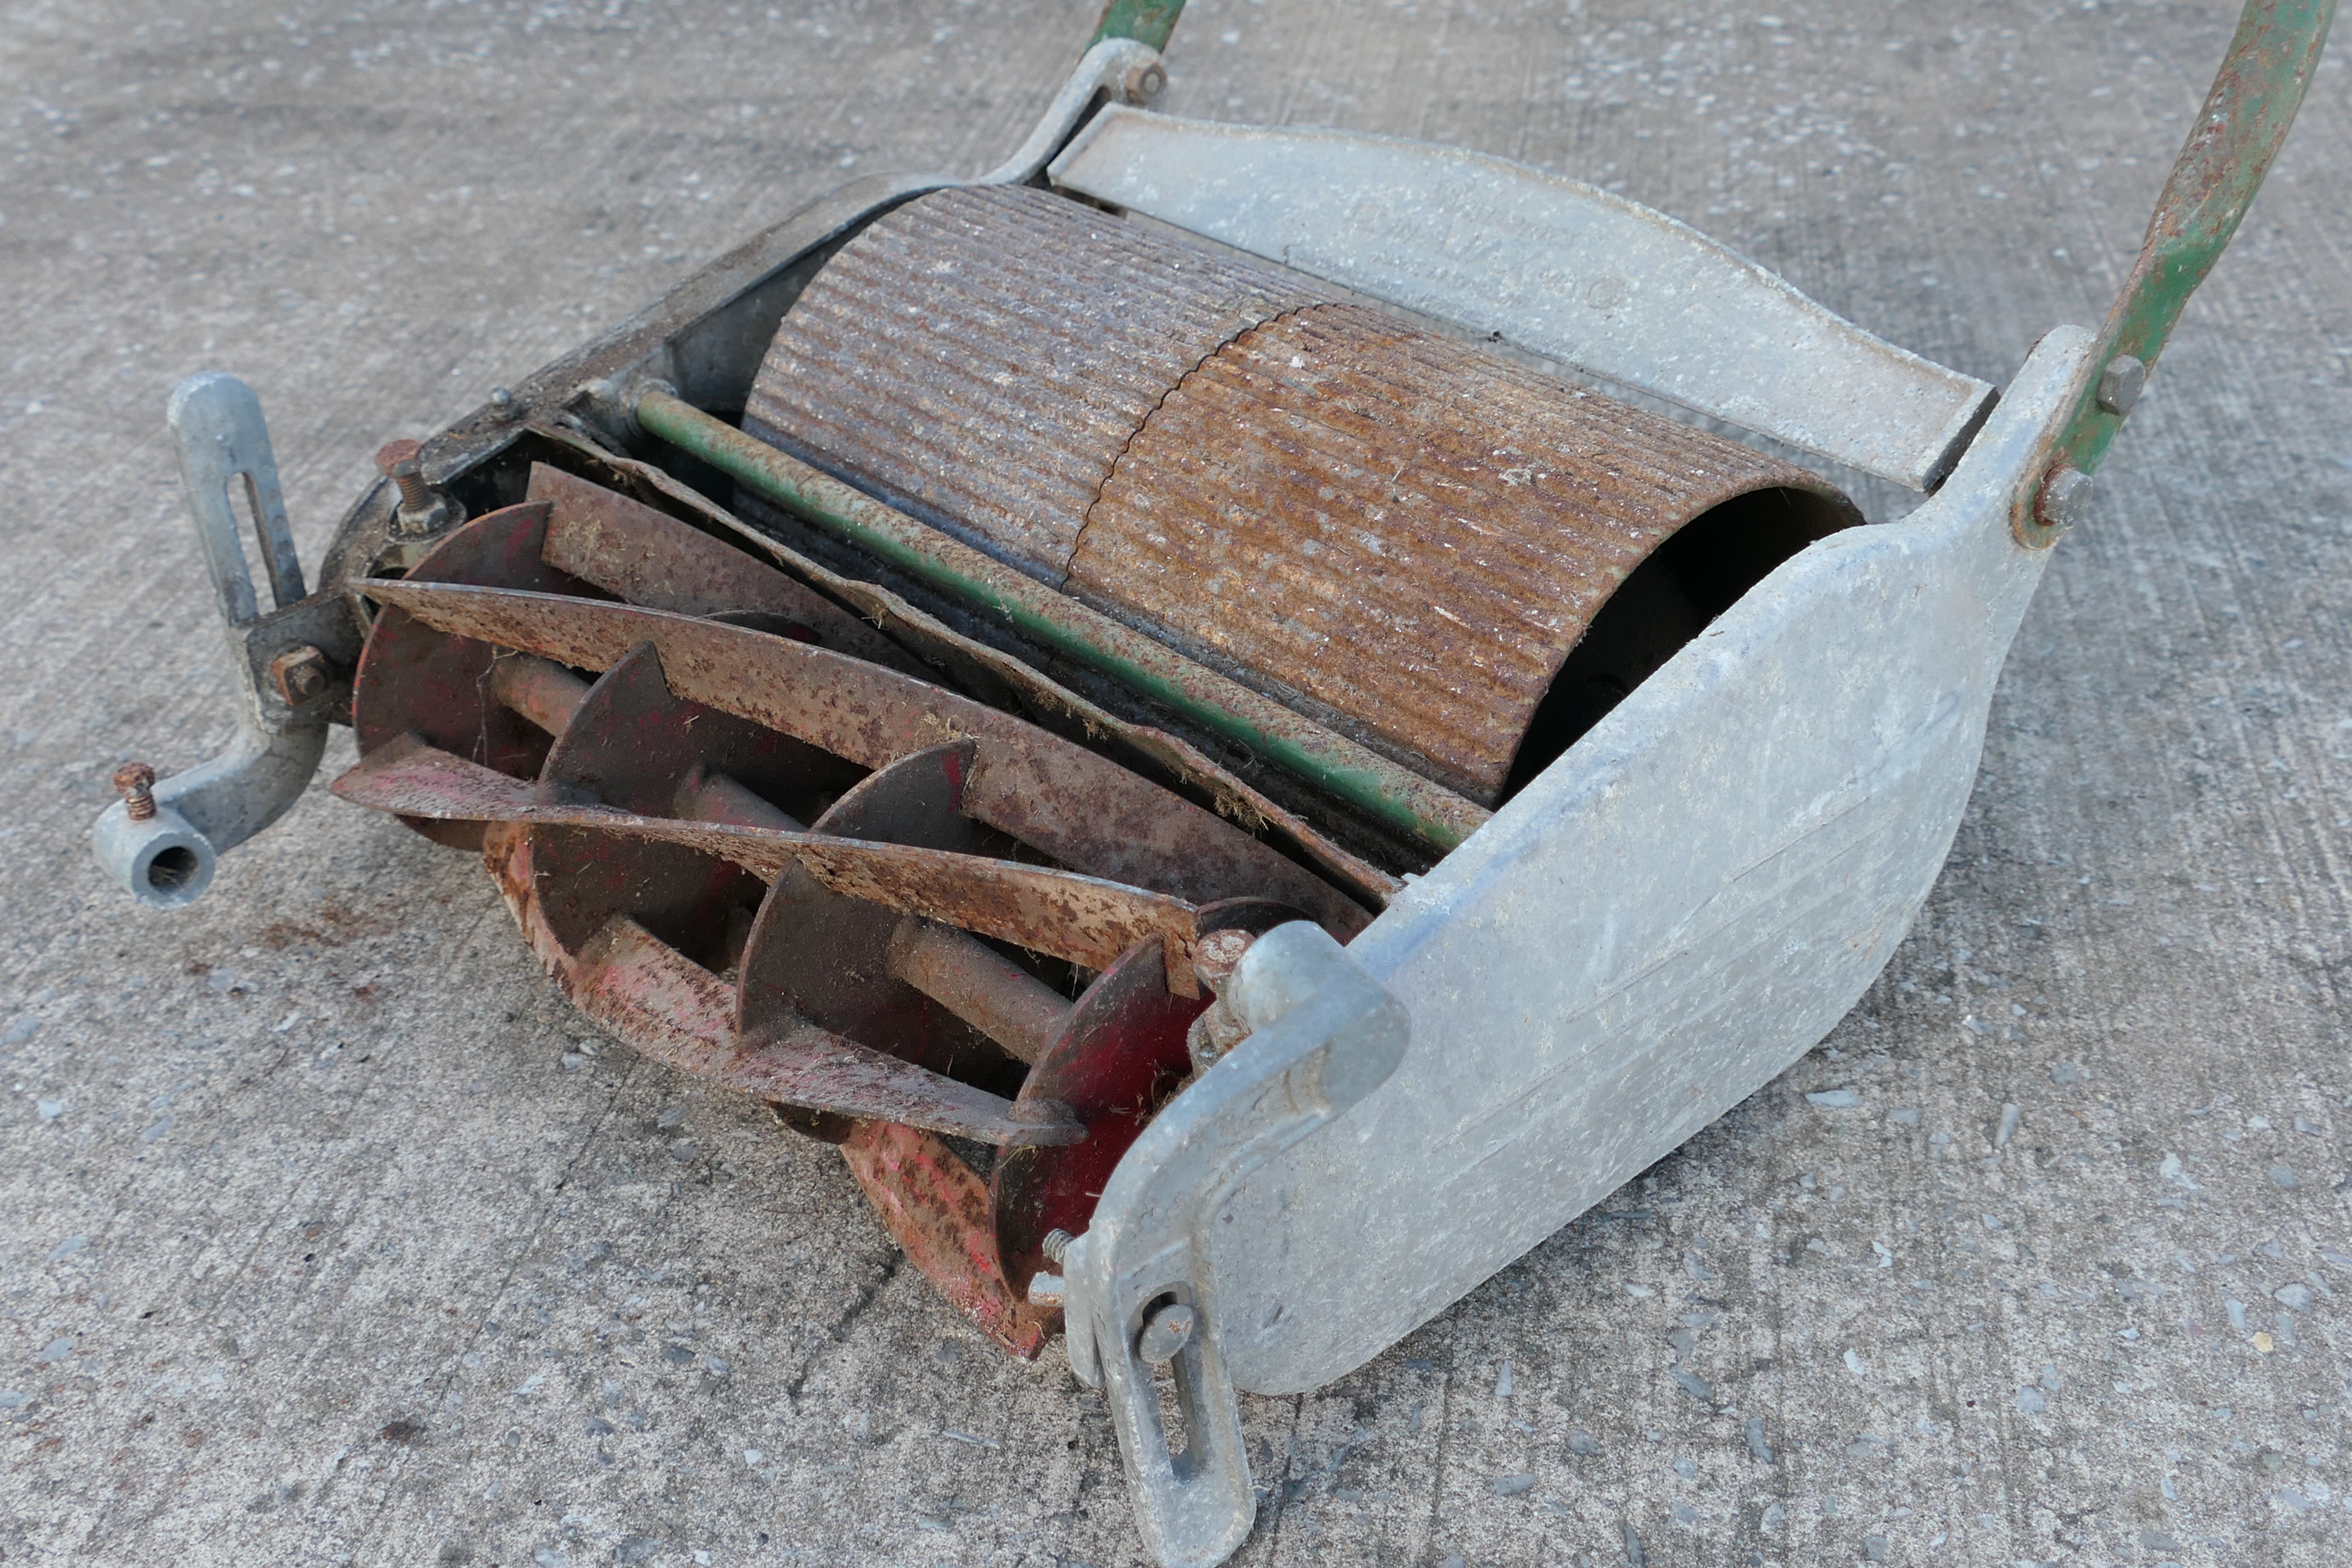 Vintage Gardening Equipment - A Ransomes 12 Inch Ajax Mk 5 lawn mower. - Image 5 of 5